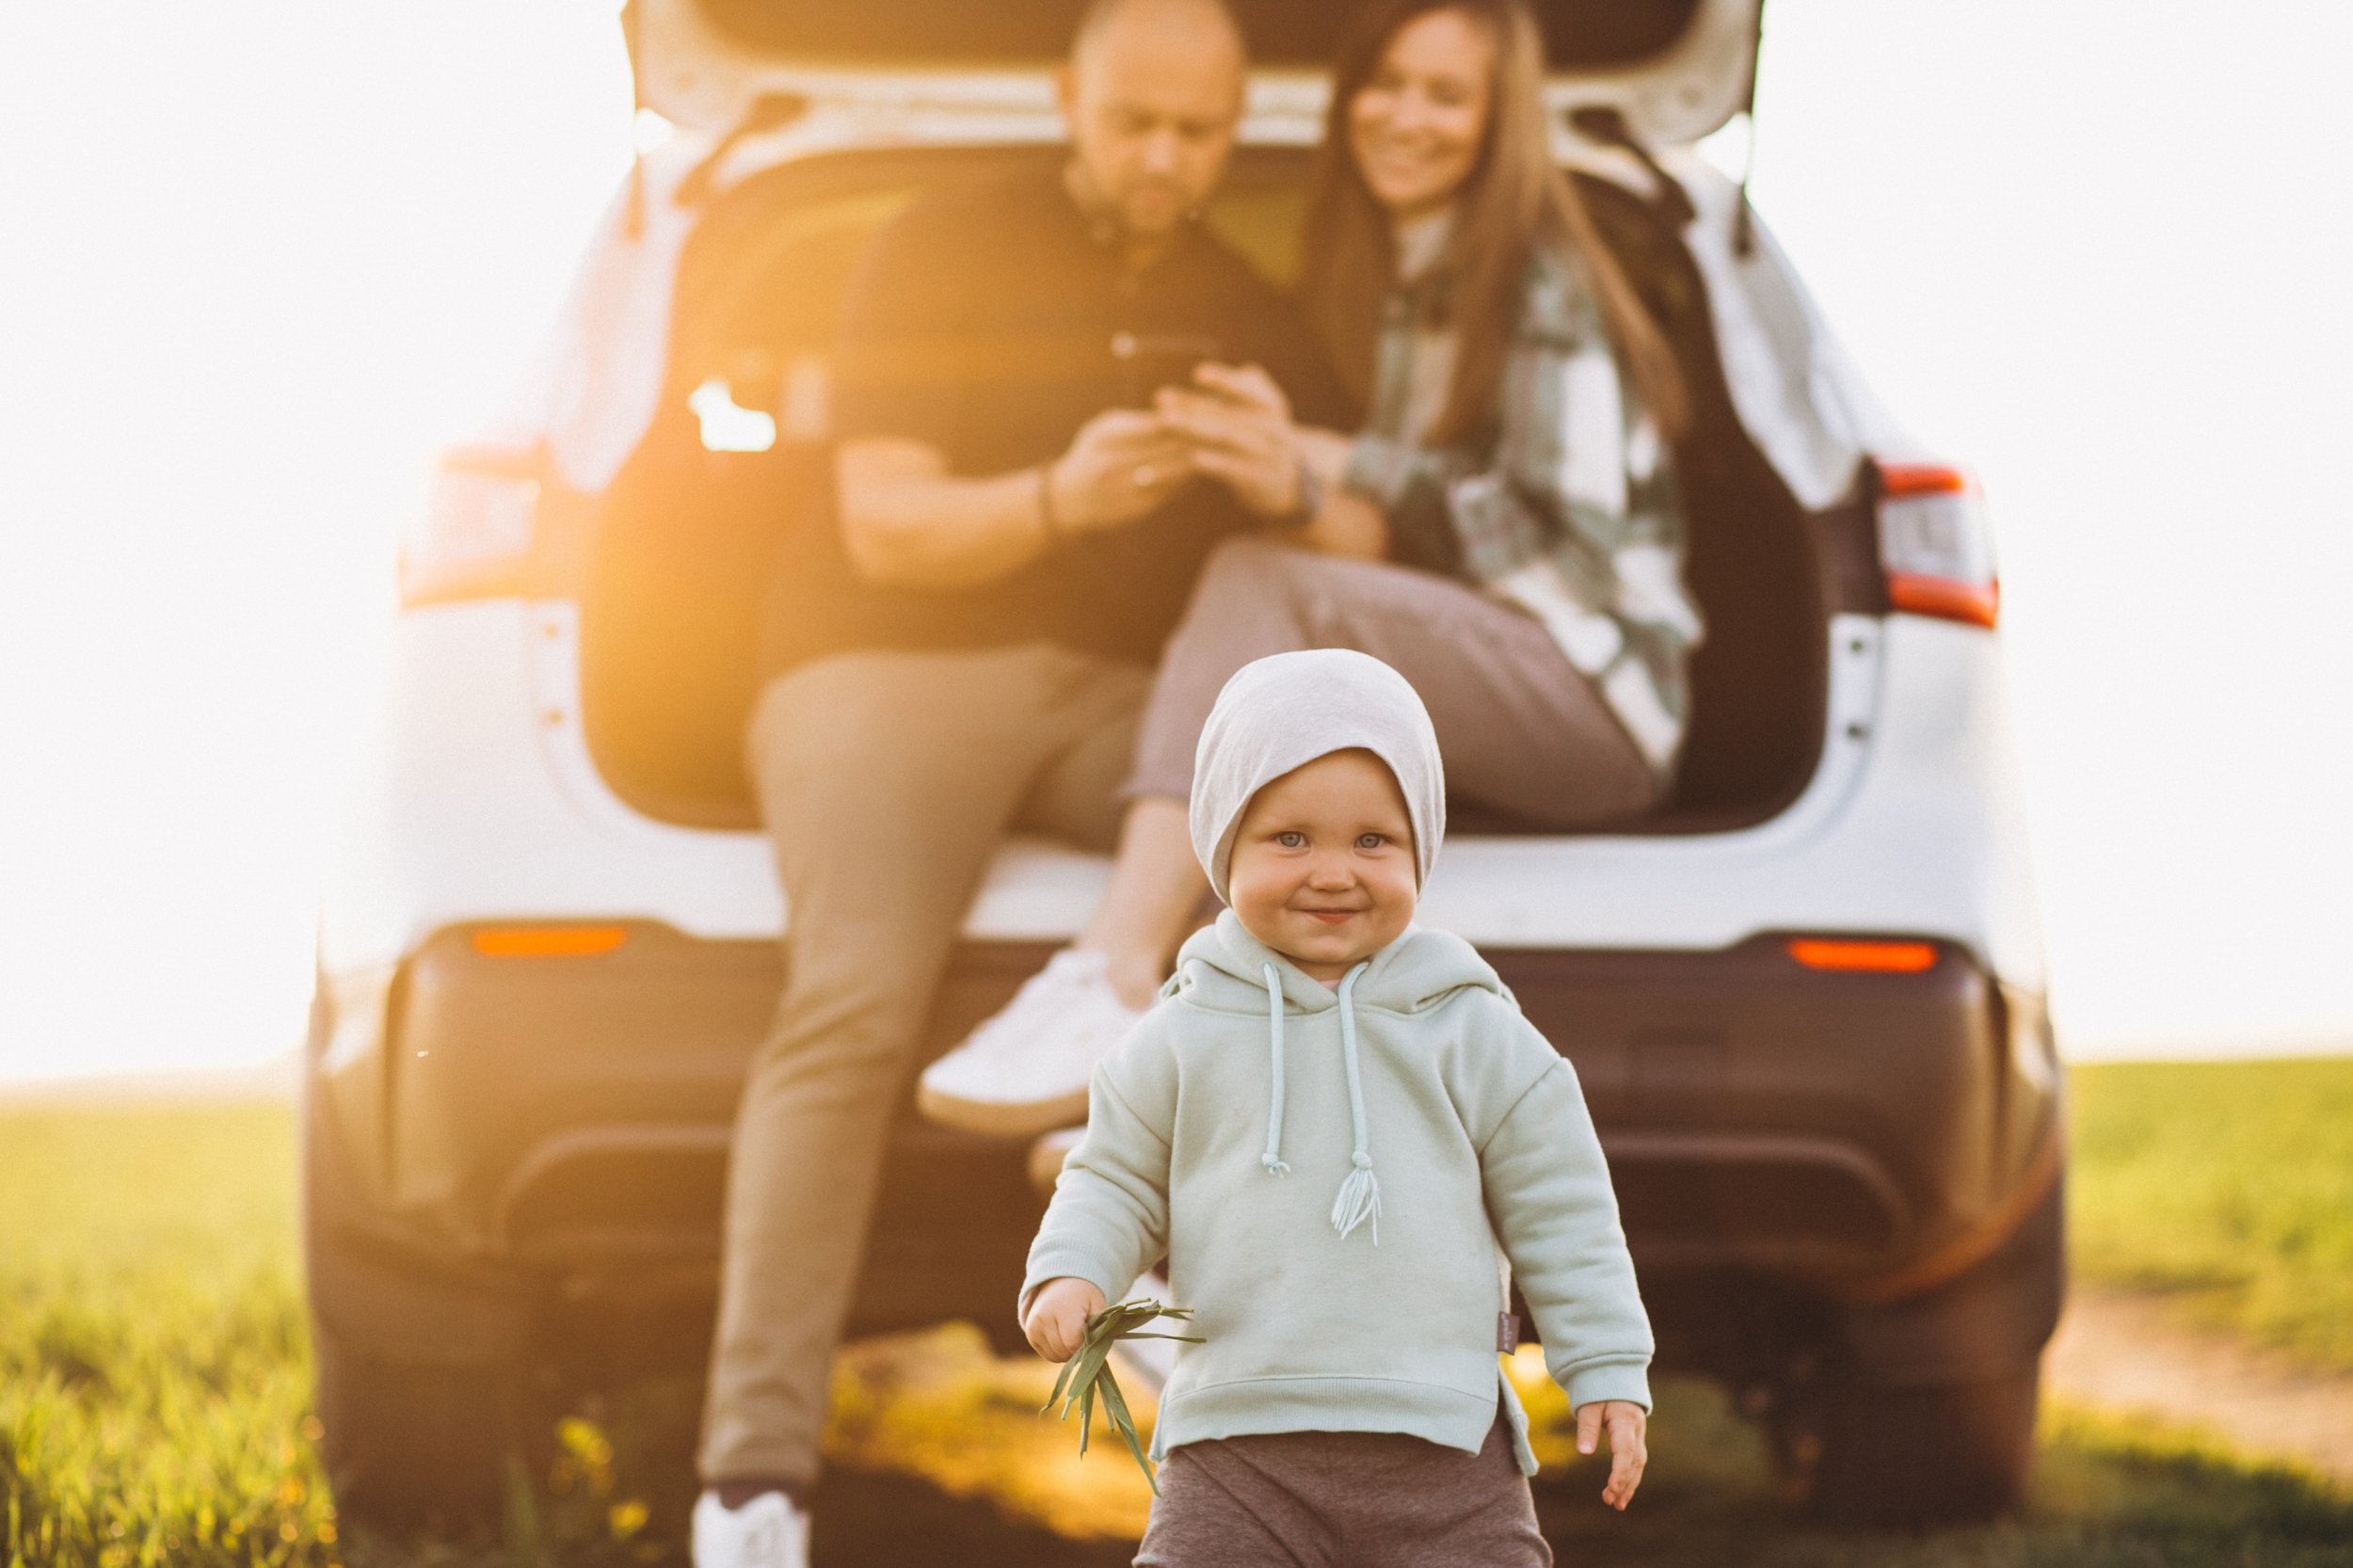 Road Trip Essentials for Kids (and Adults)! — The Car Mom